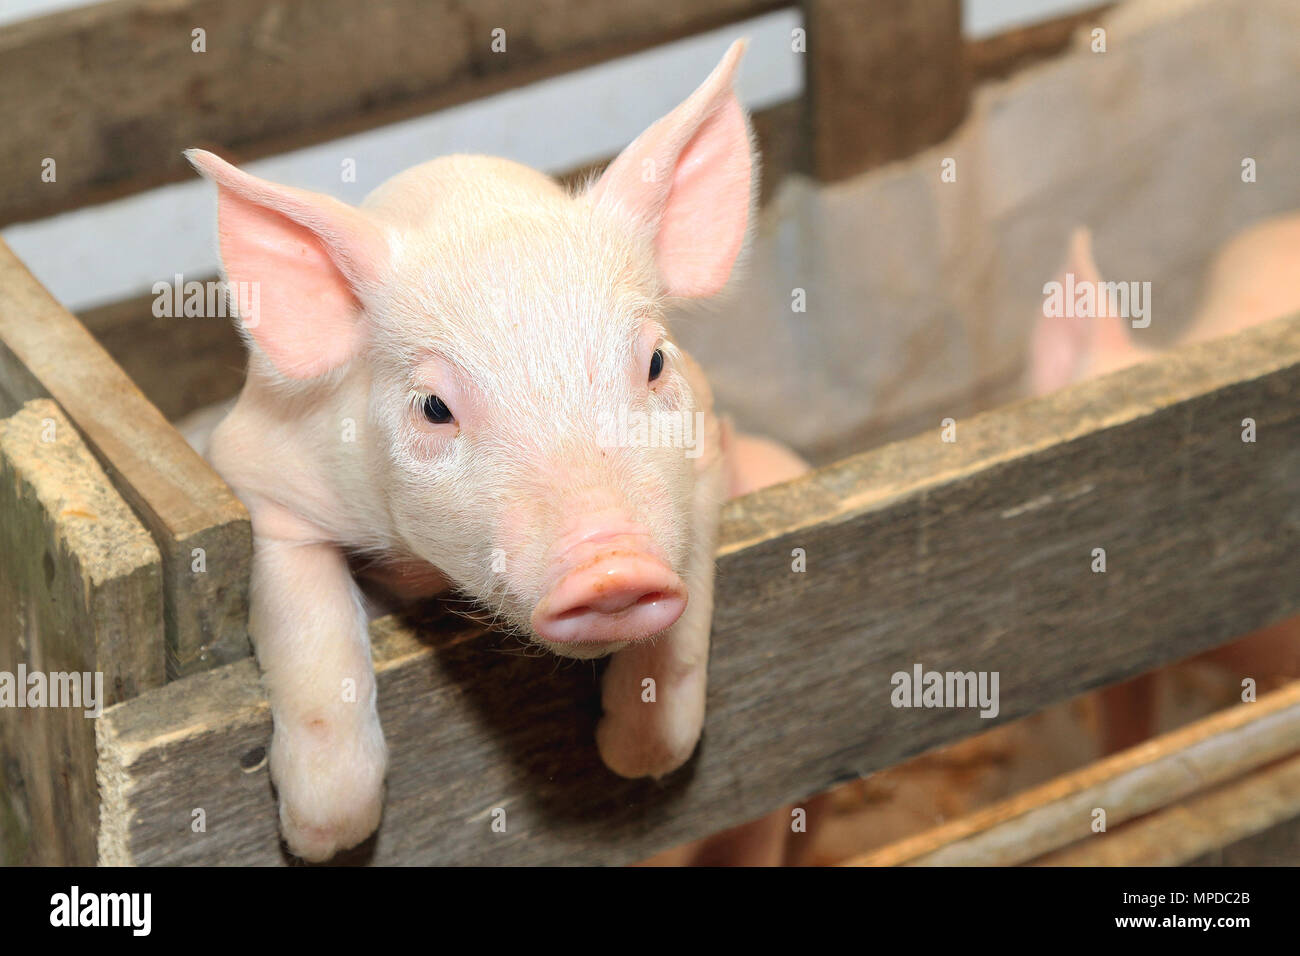 Small and Funny Pink Piglet at Pen Fence Stock Photo